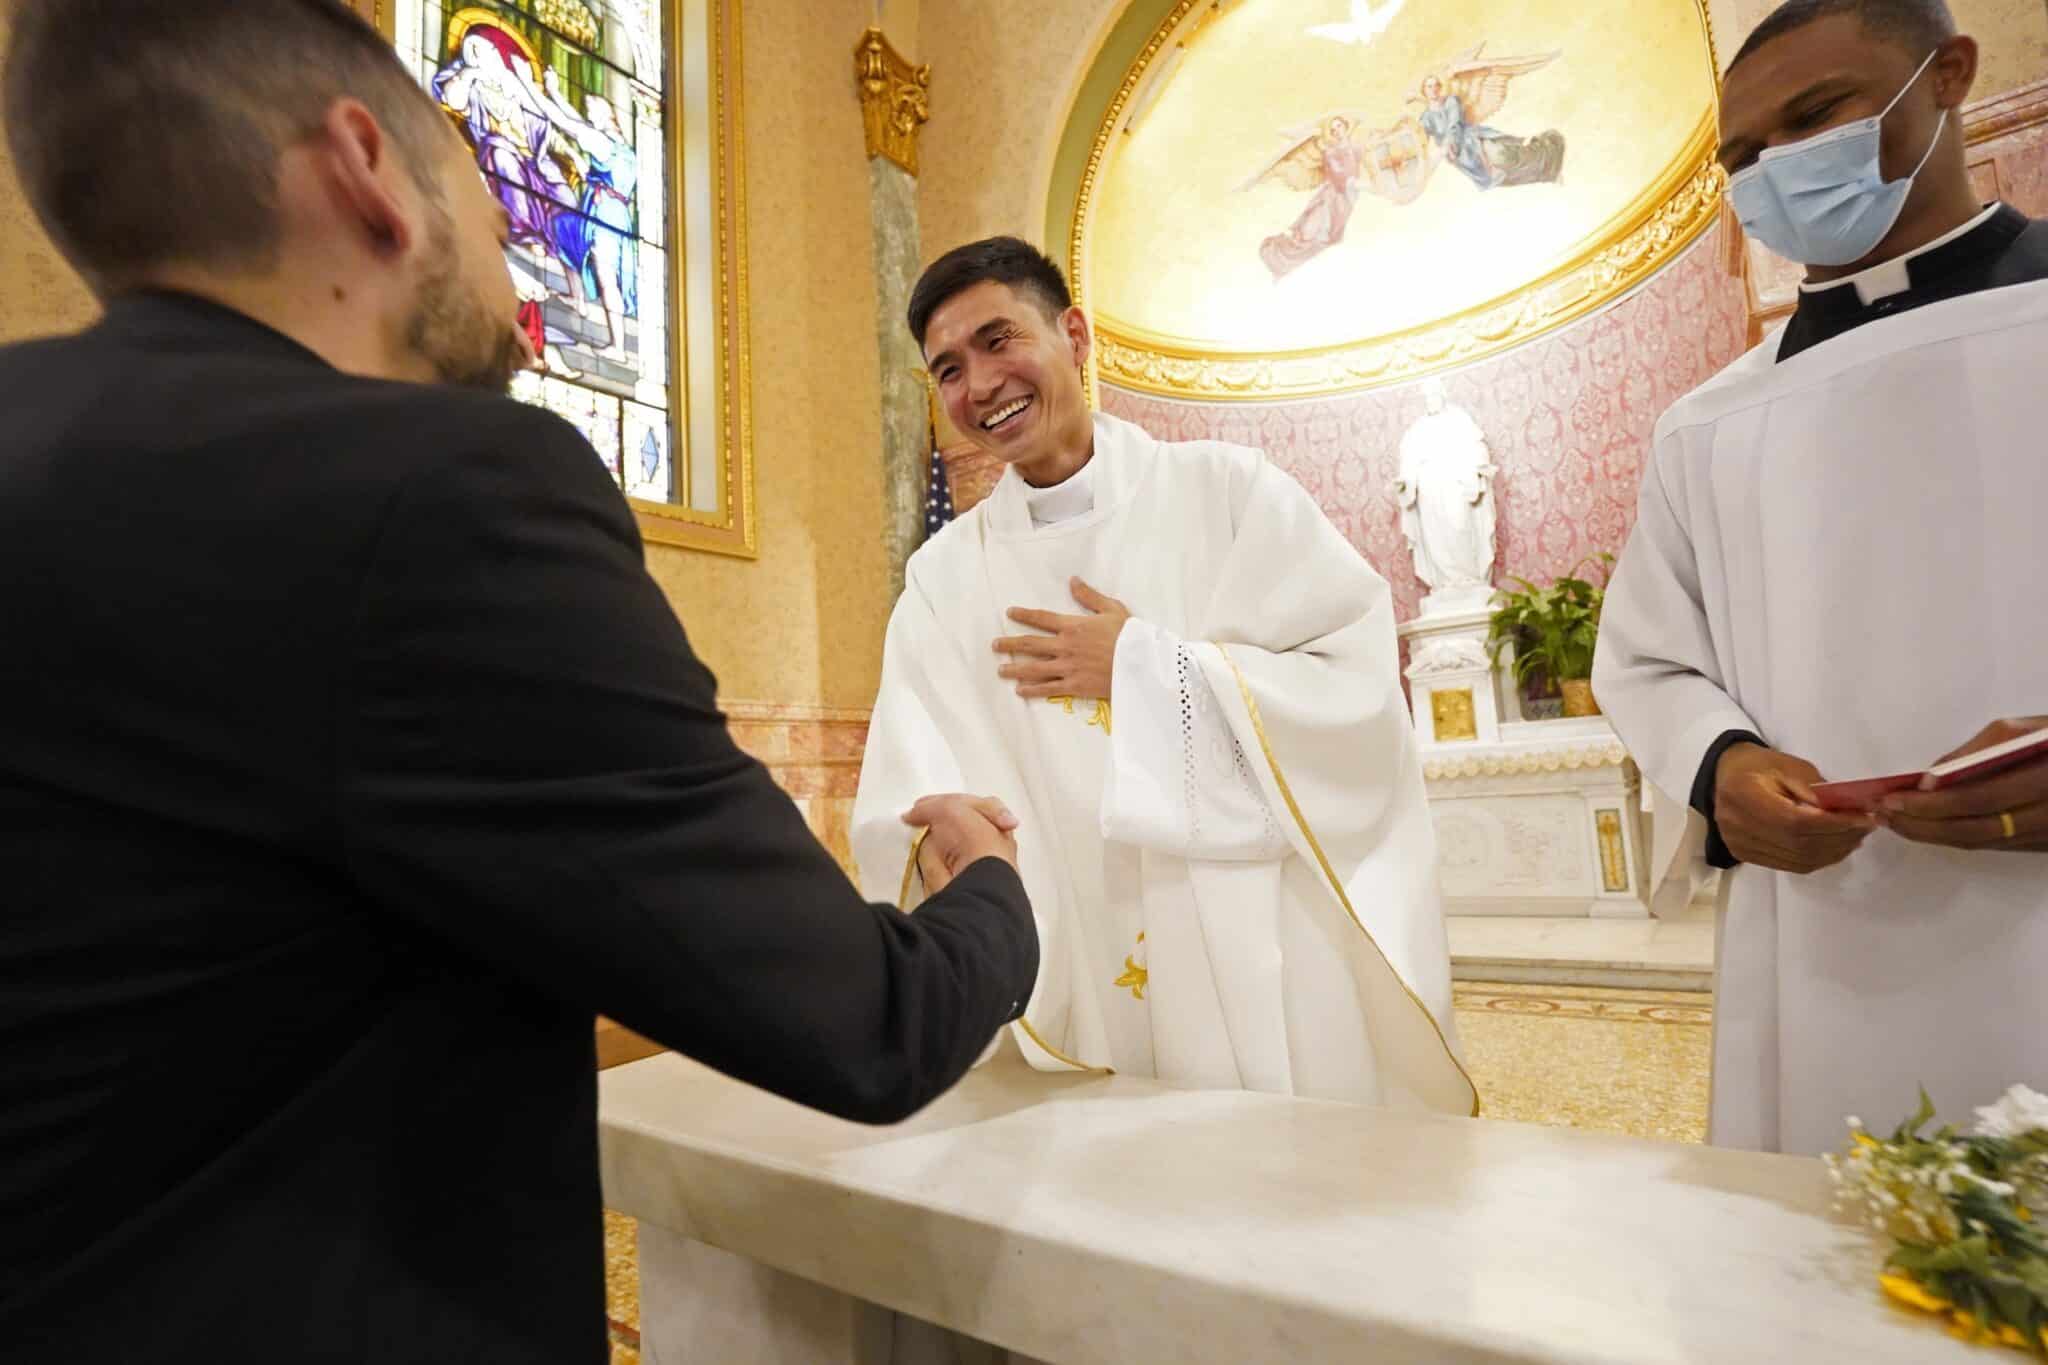 Father Chin Nguyen greets a well-wisher following his ordination to the priesthood June 5, 2021, at the Co-Cathedral of St. Joseph in Brooklyn, N.Y. Father Nguyen, who was born in Vietnam, was one of four men ordained by Bishop Nicholas DiMarzio of Brooklyn at the Mass. (OSV News photo/Gregory A. Shemitz)